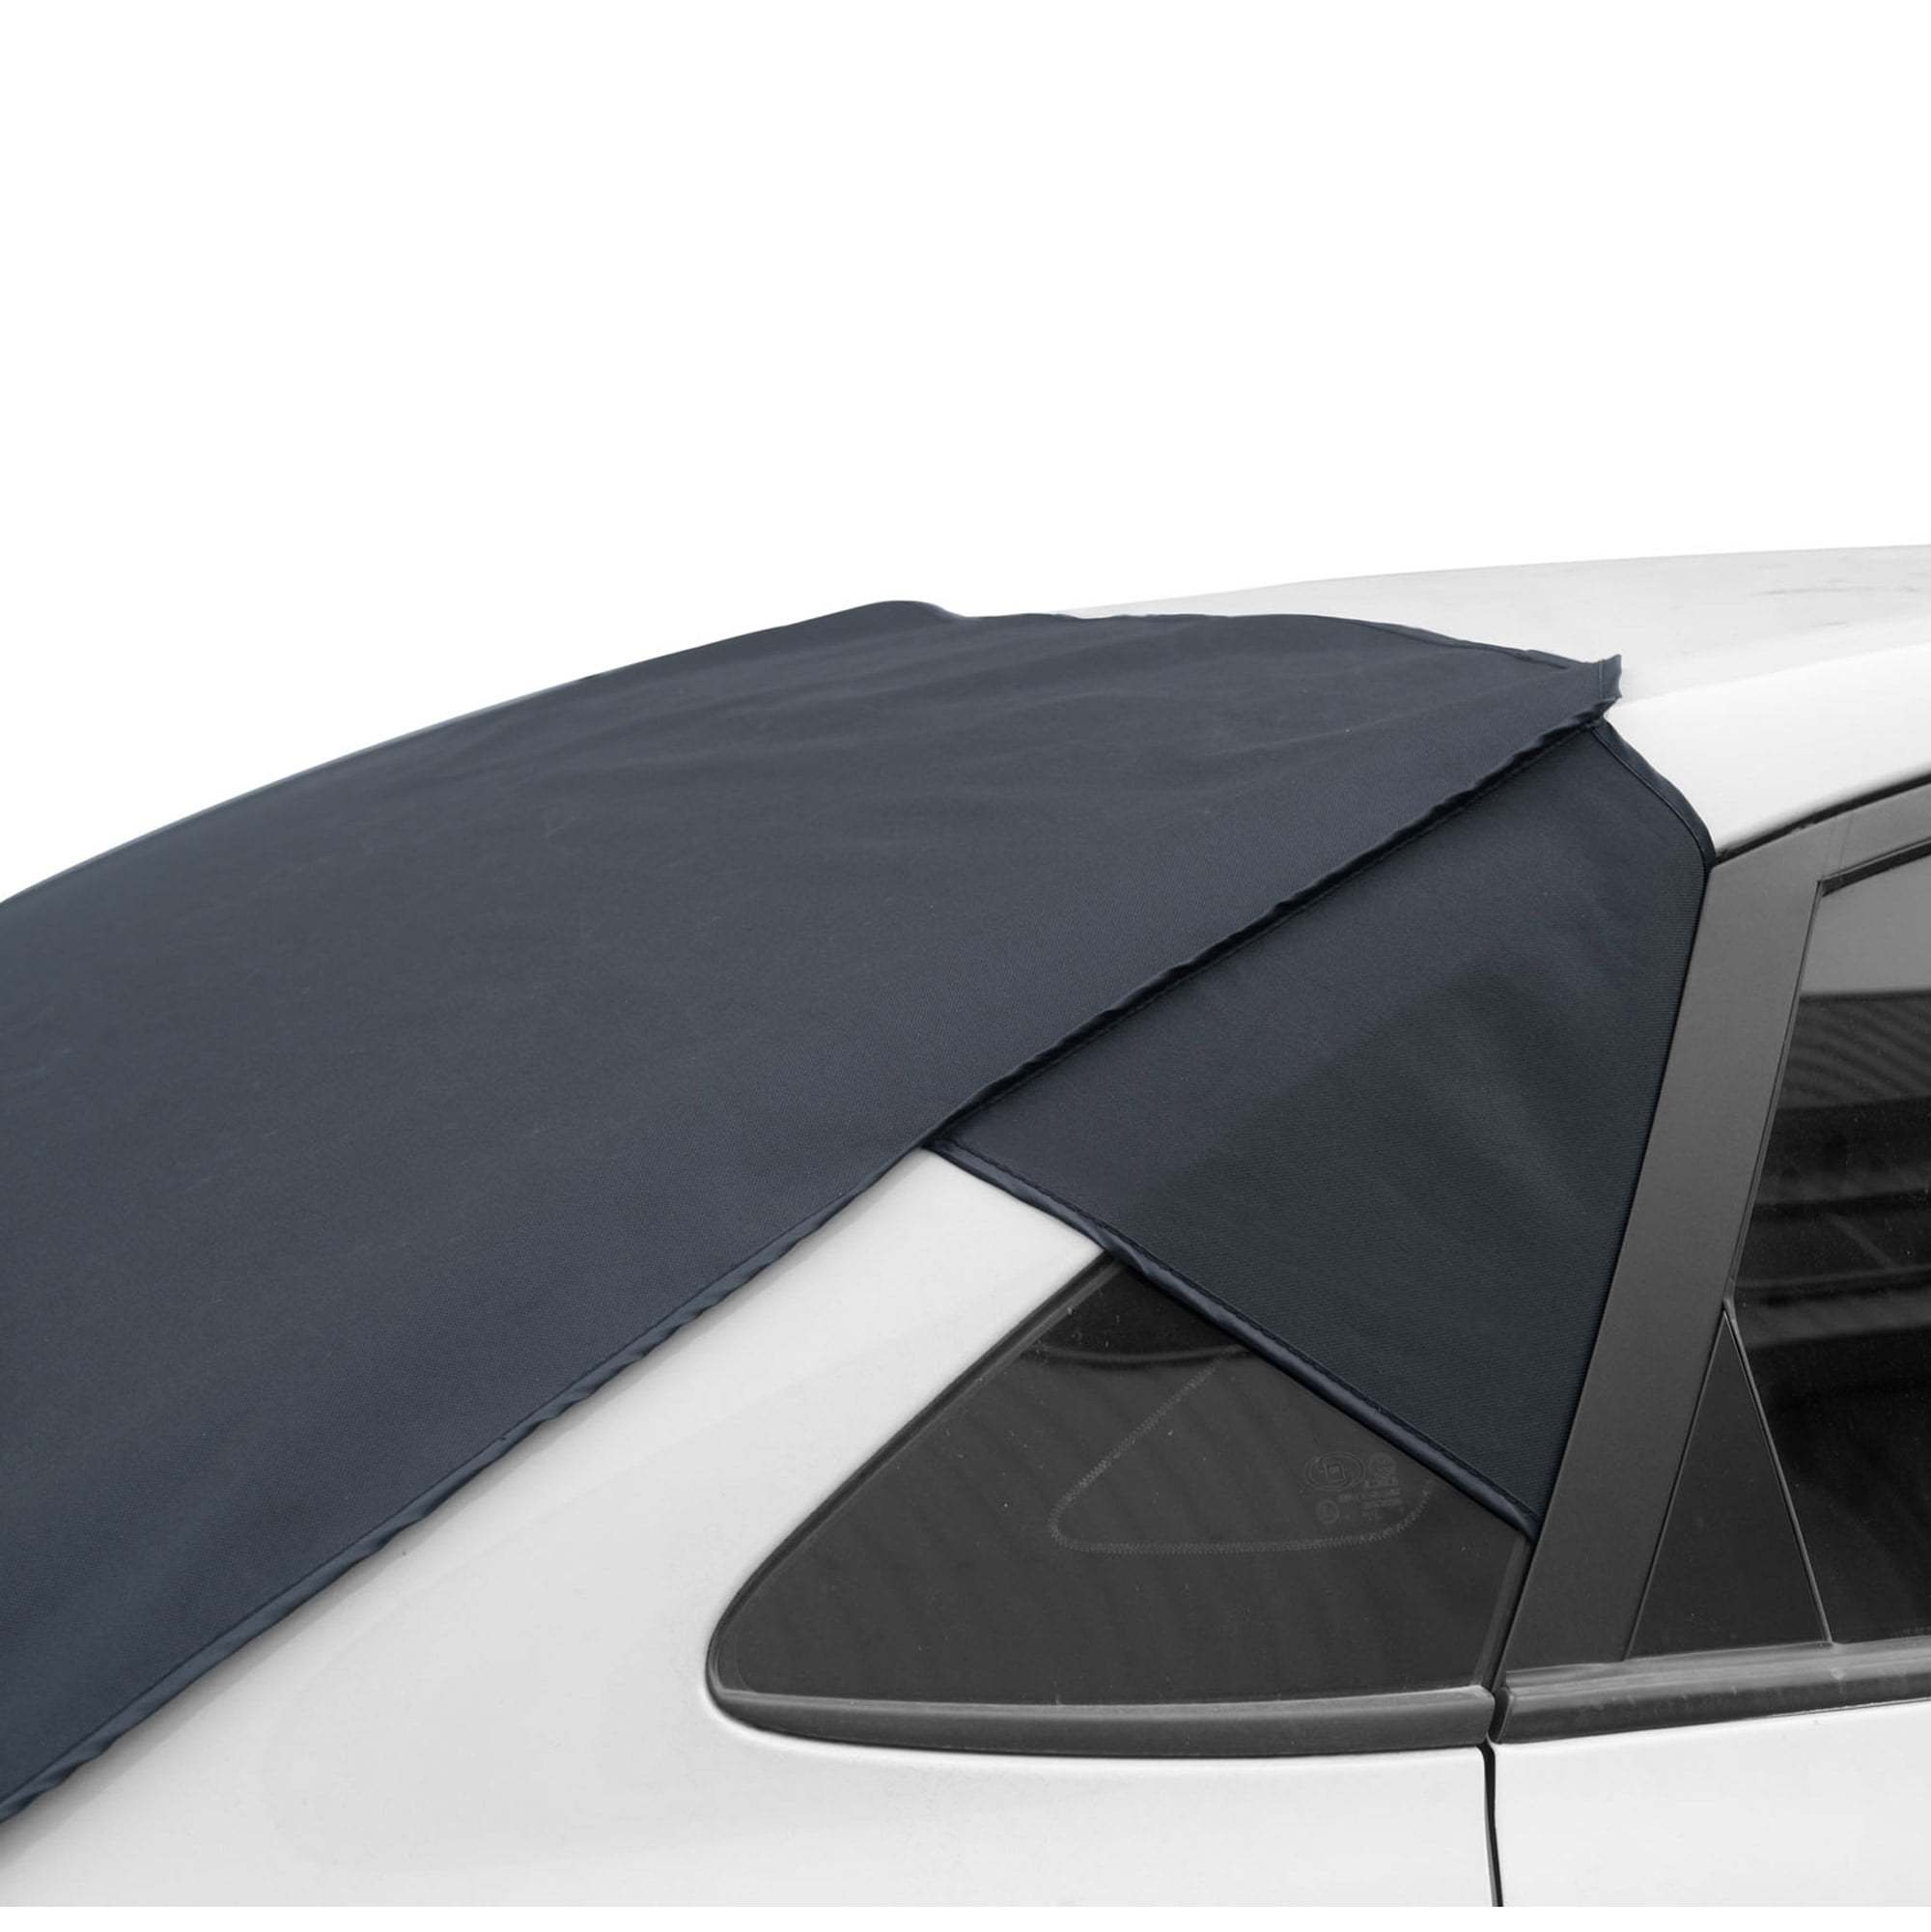 Winter Car Windshield Cover Windscreen Shade Cover, Frost Guard, And Snow  Protector For Winter And Summer From Eforcar, $6.84